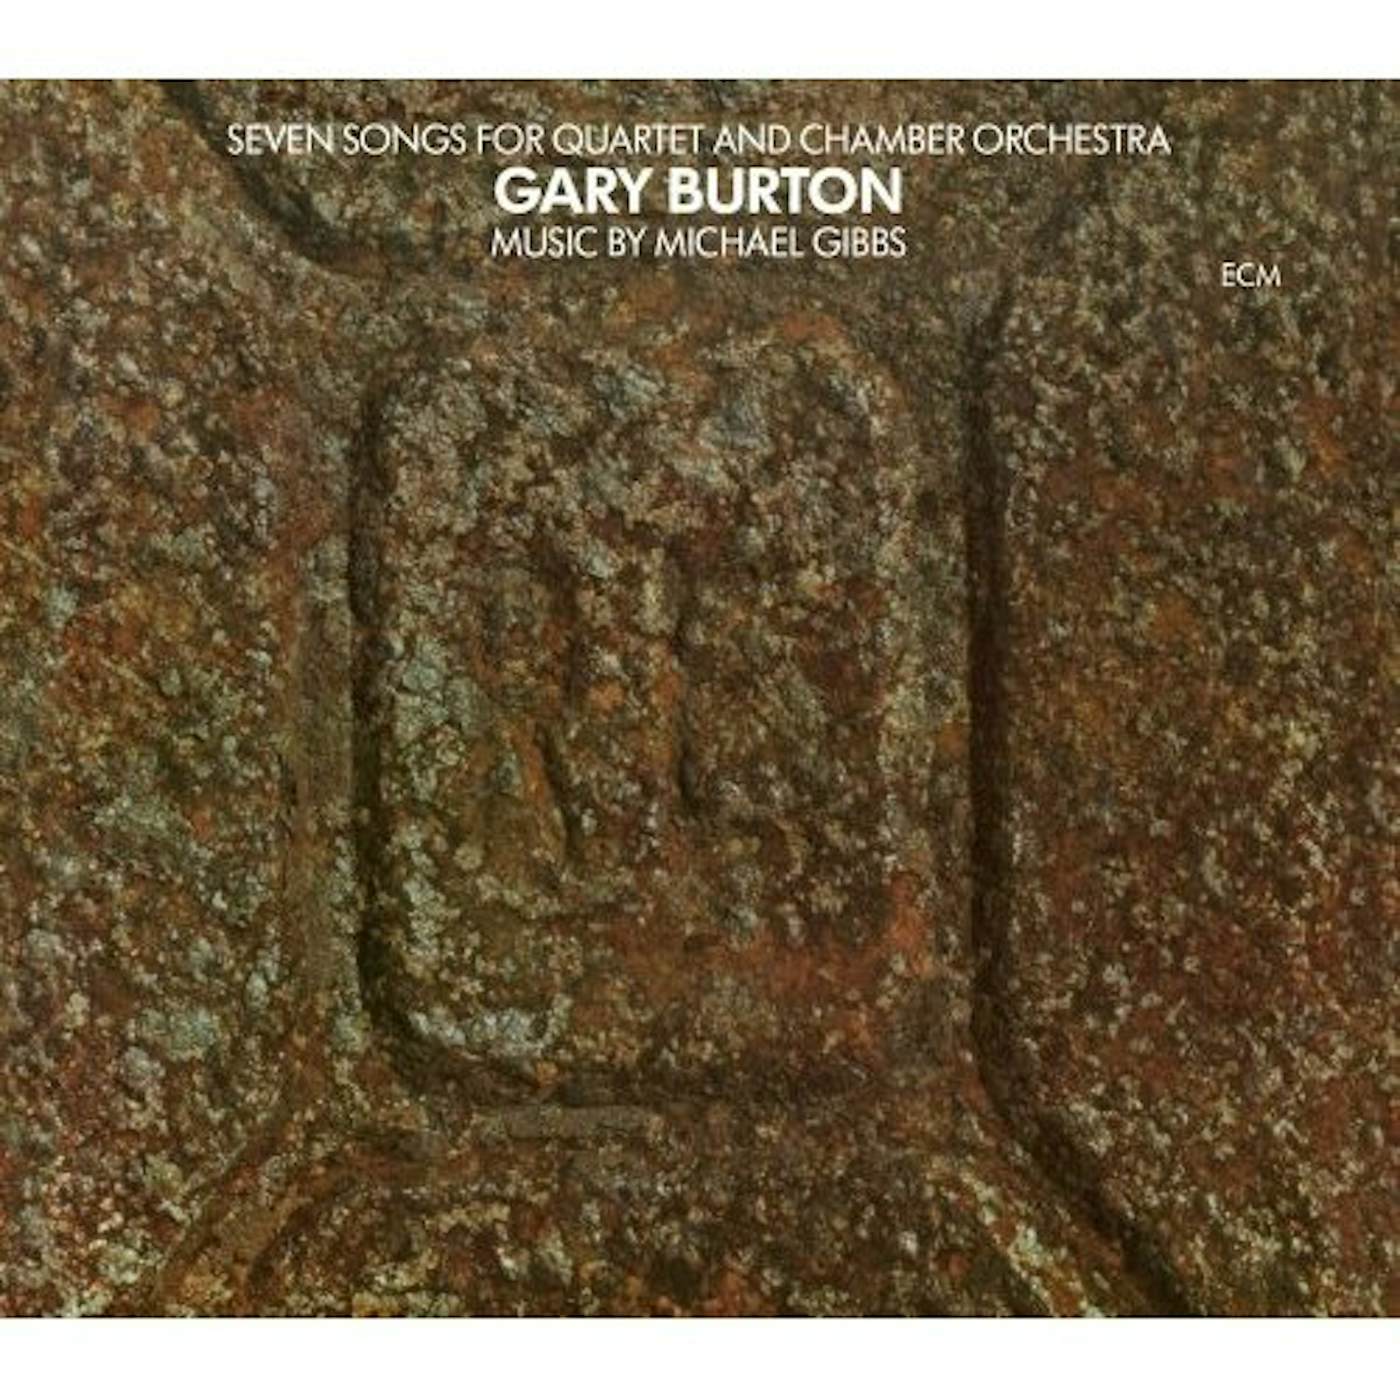 Gary Burton Seven Songs For Quartet And Chamber Orchestra Vinyl Record